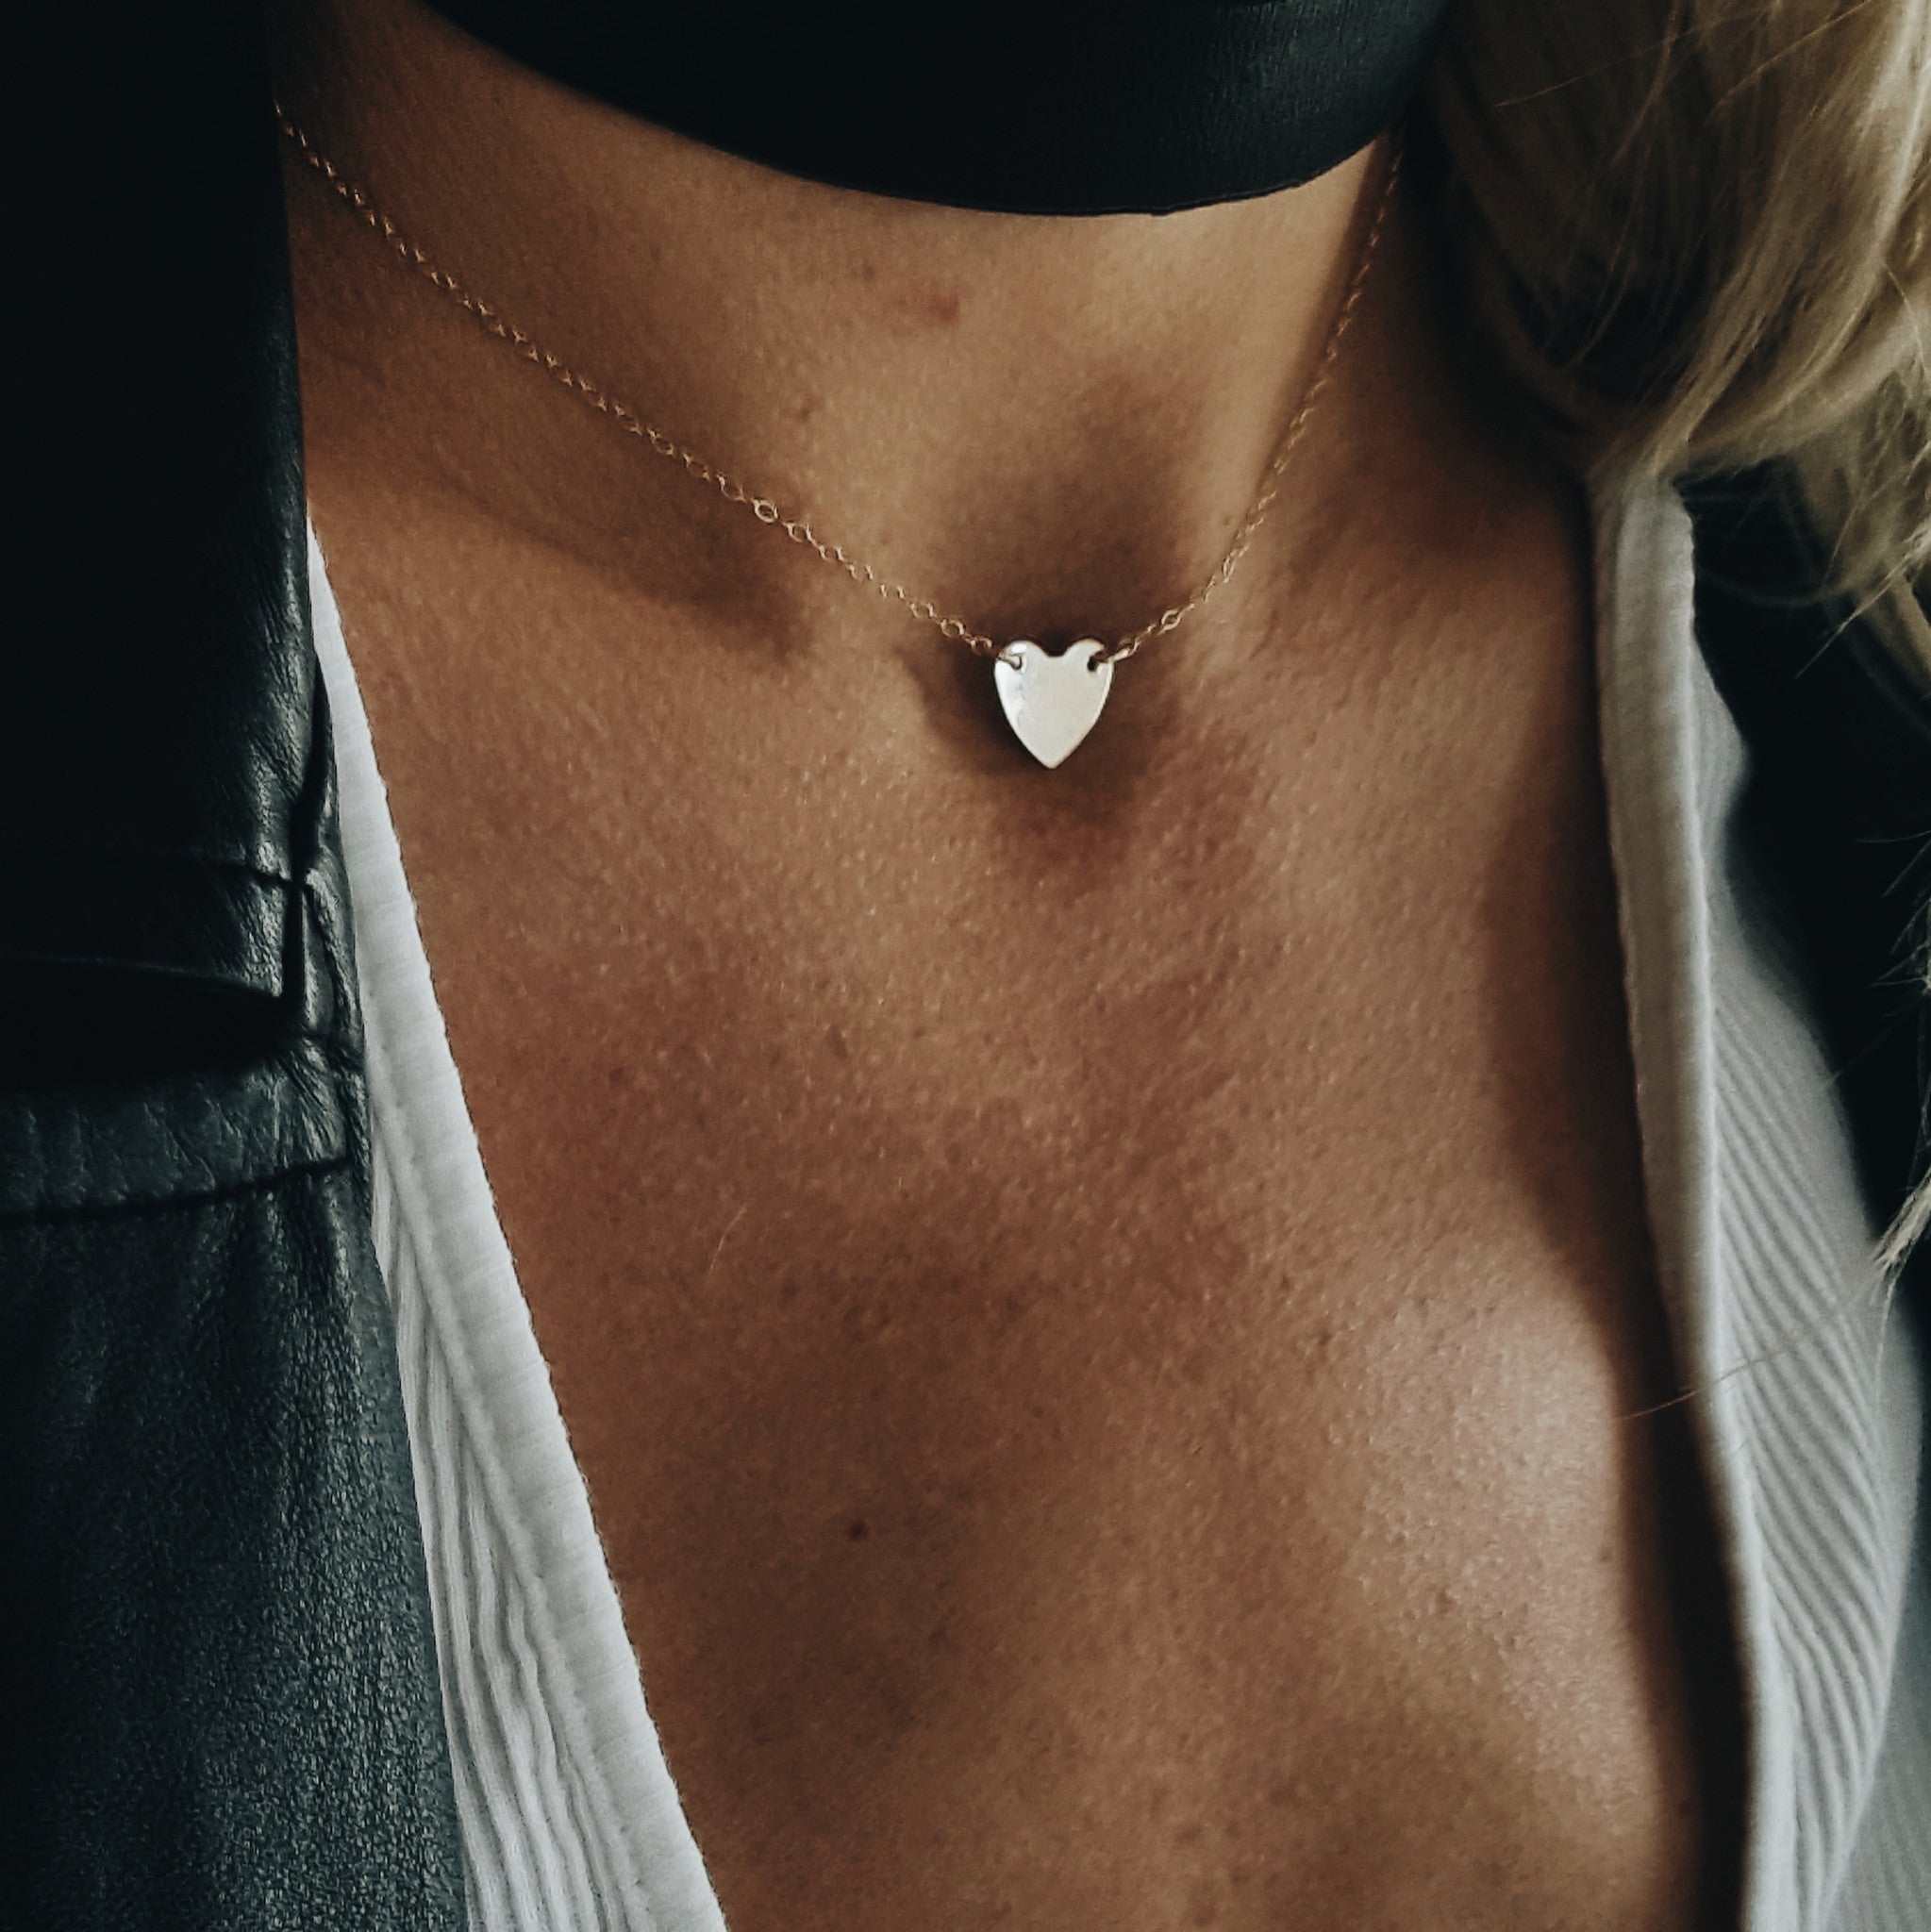 a close up of a woman's neck wearing a gold chain chocker with a small heart pendant and thick black choker